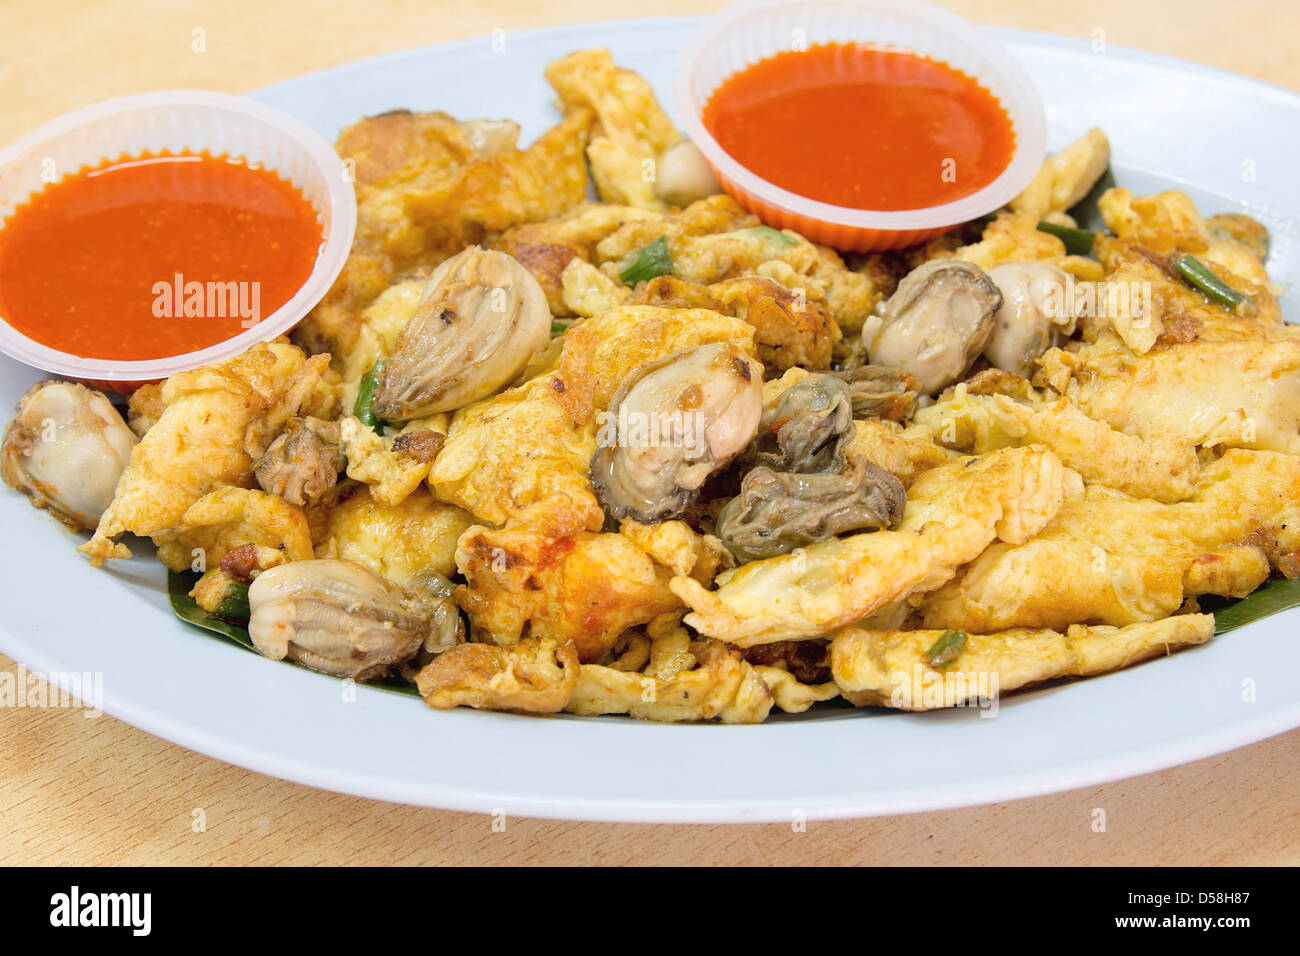 Southeasat Asian Fried Baby Oyster Omelette Oh Chien with Chili Sauce Closeup Stock Photo